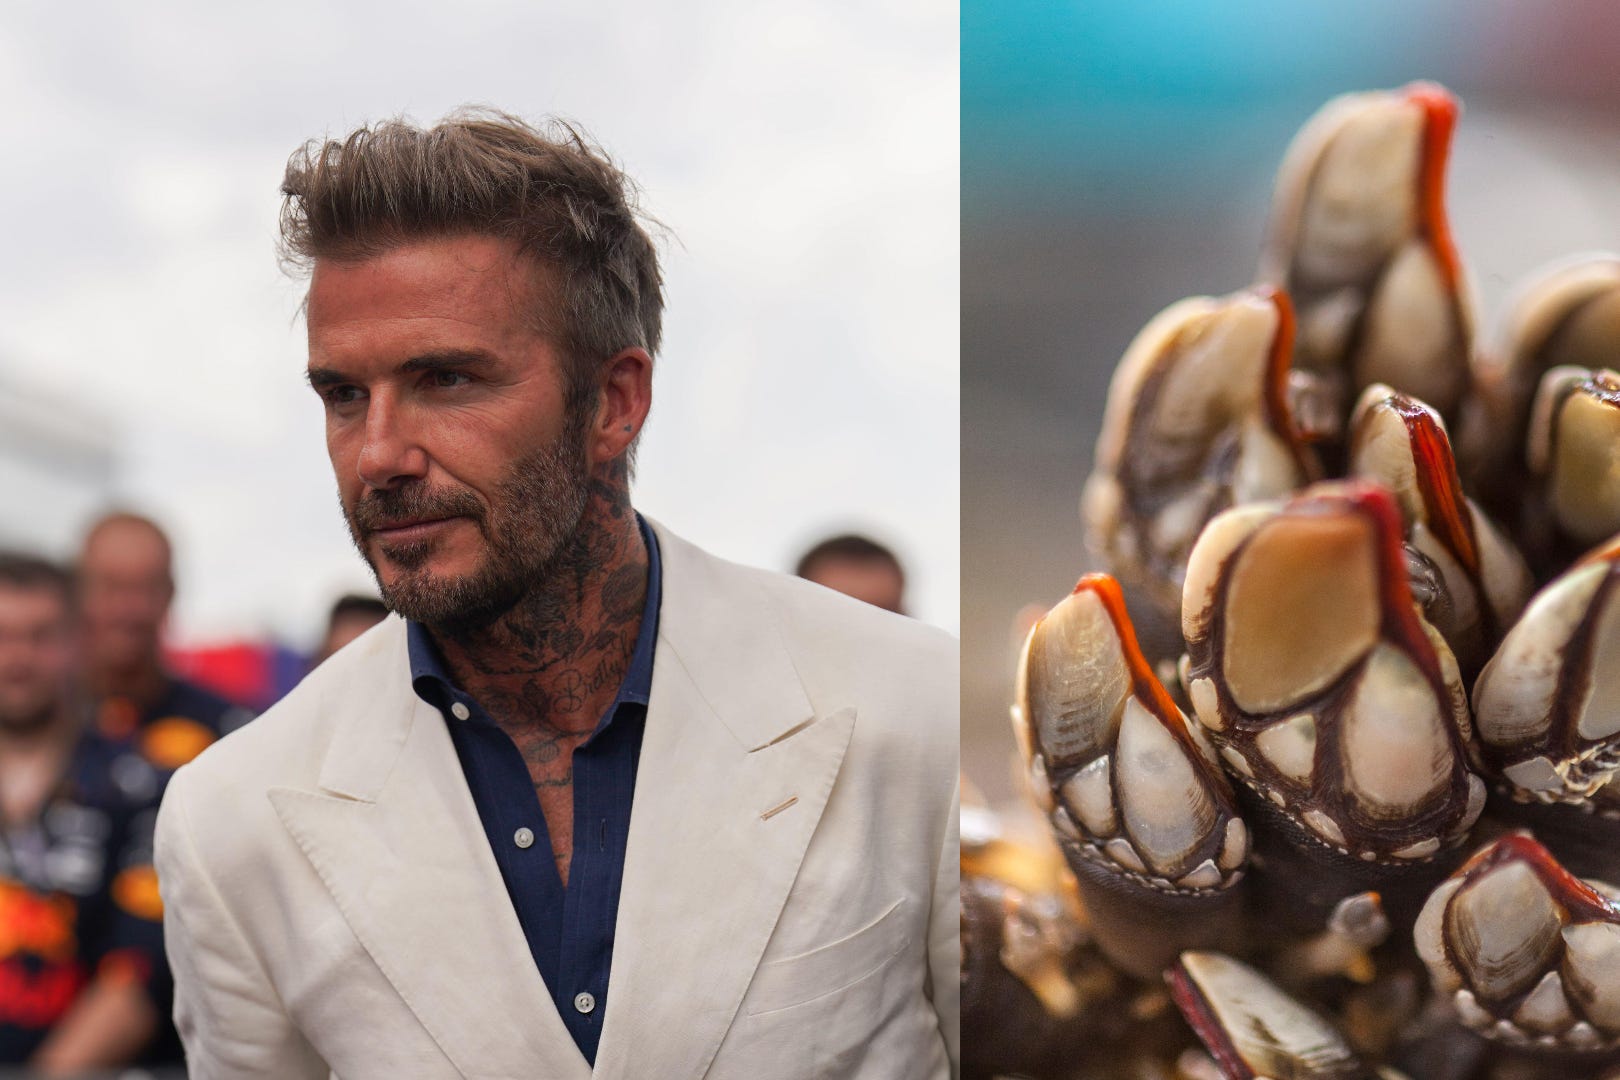 David Beckham has been tucking into a rare, alien-looking delicacy in Spain